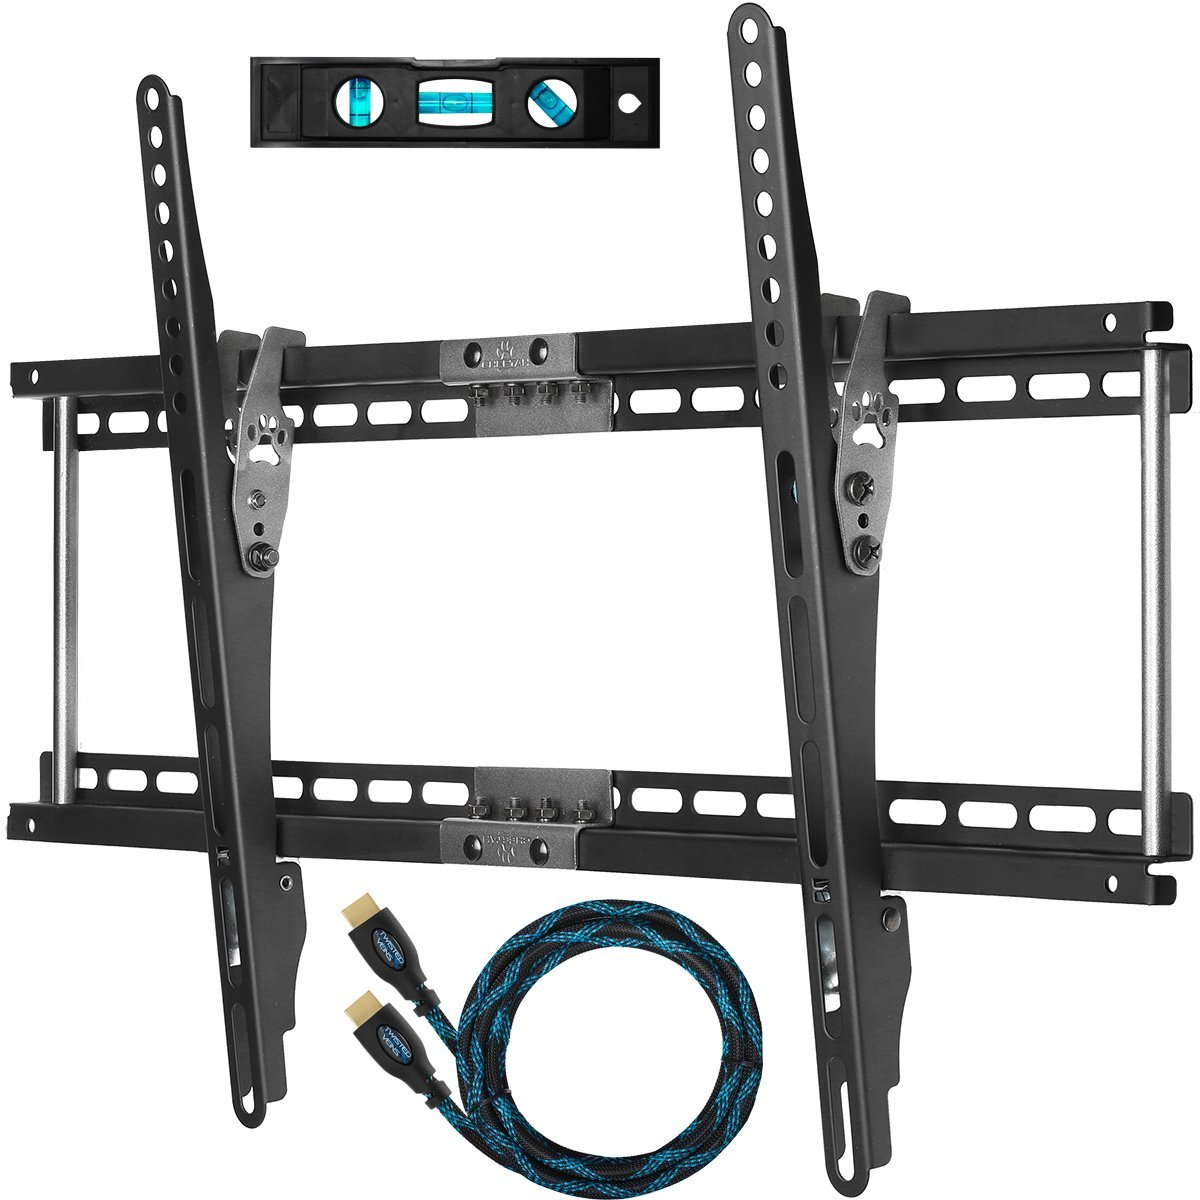 HIGHLY RATED Cheetah TV Wall Mount (for 20-75inch) Kit Only $18.17 on Amazon!